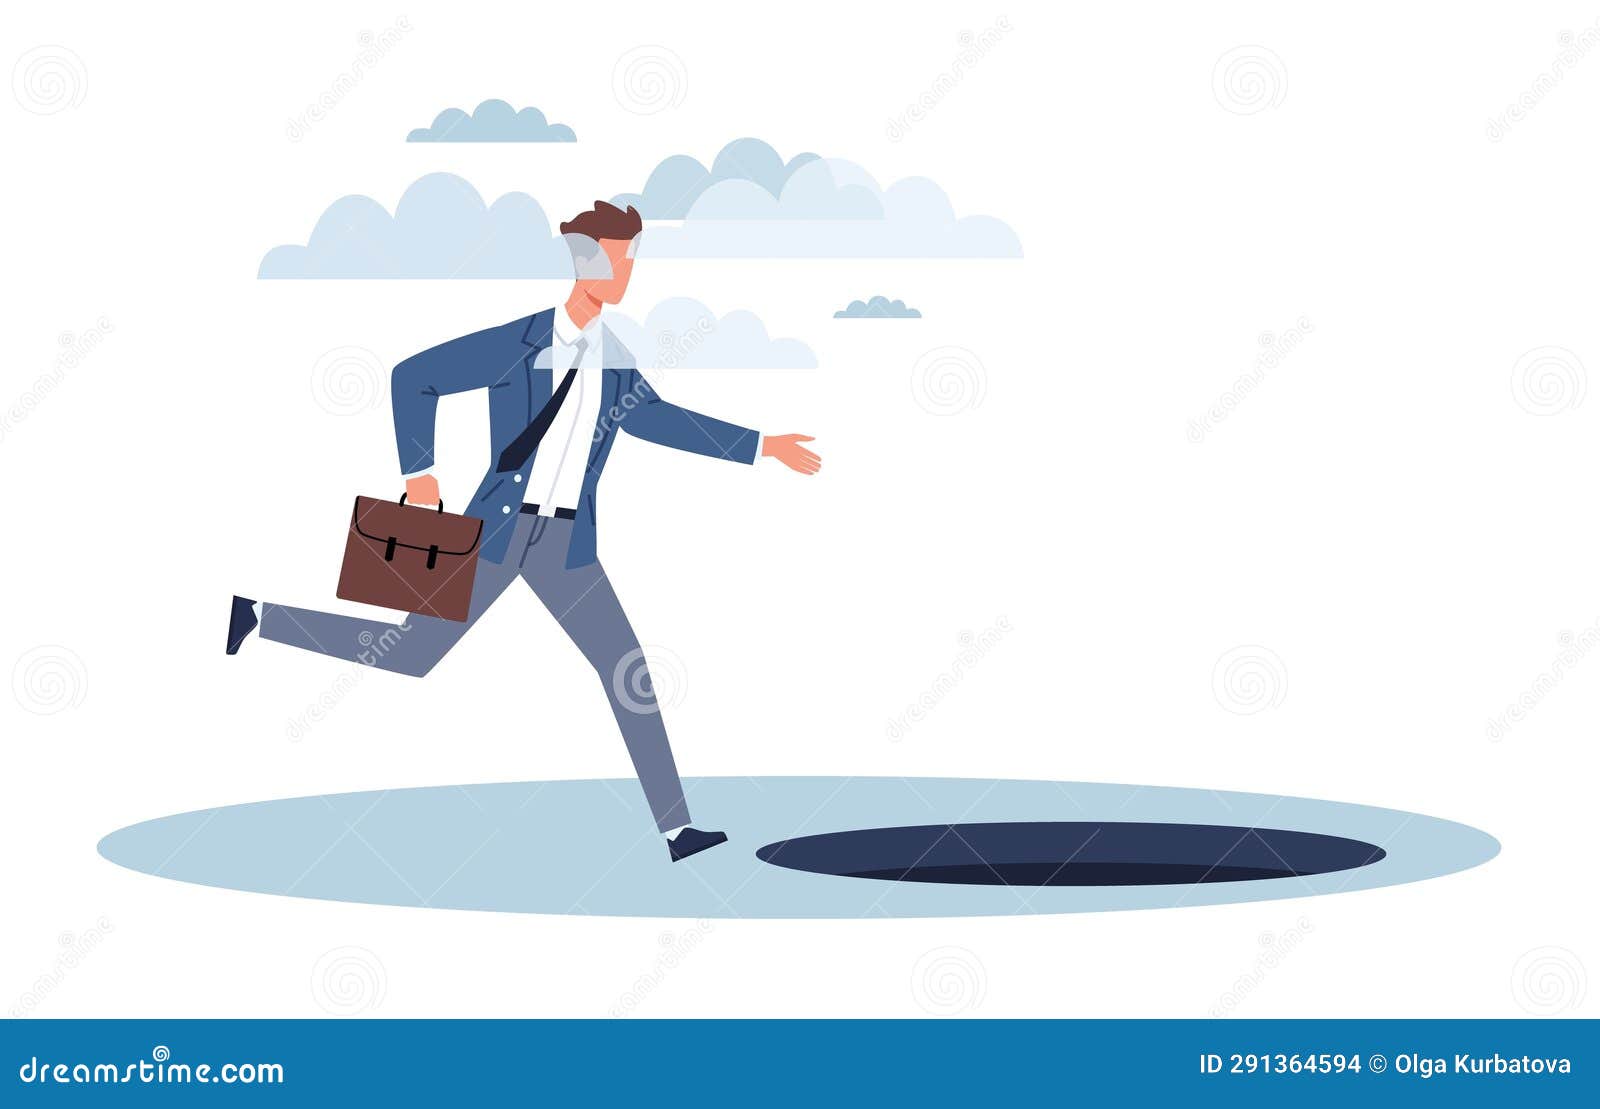 lost businessman with fog in his head runs forward without noticing hole. danger or business accident, loss or pitfall